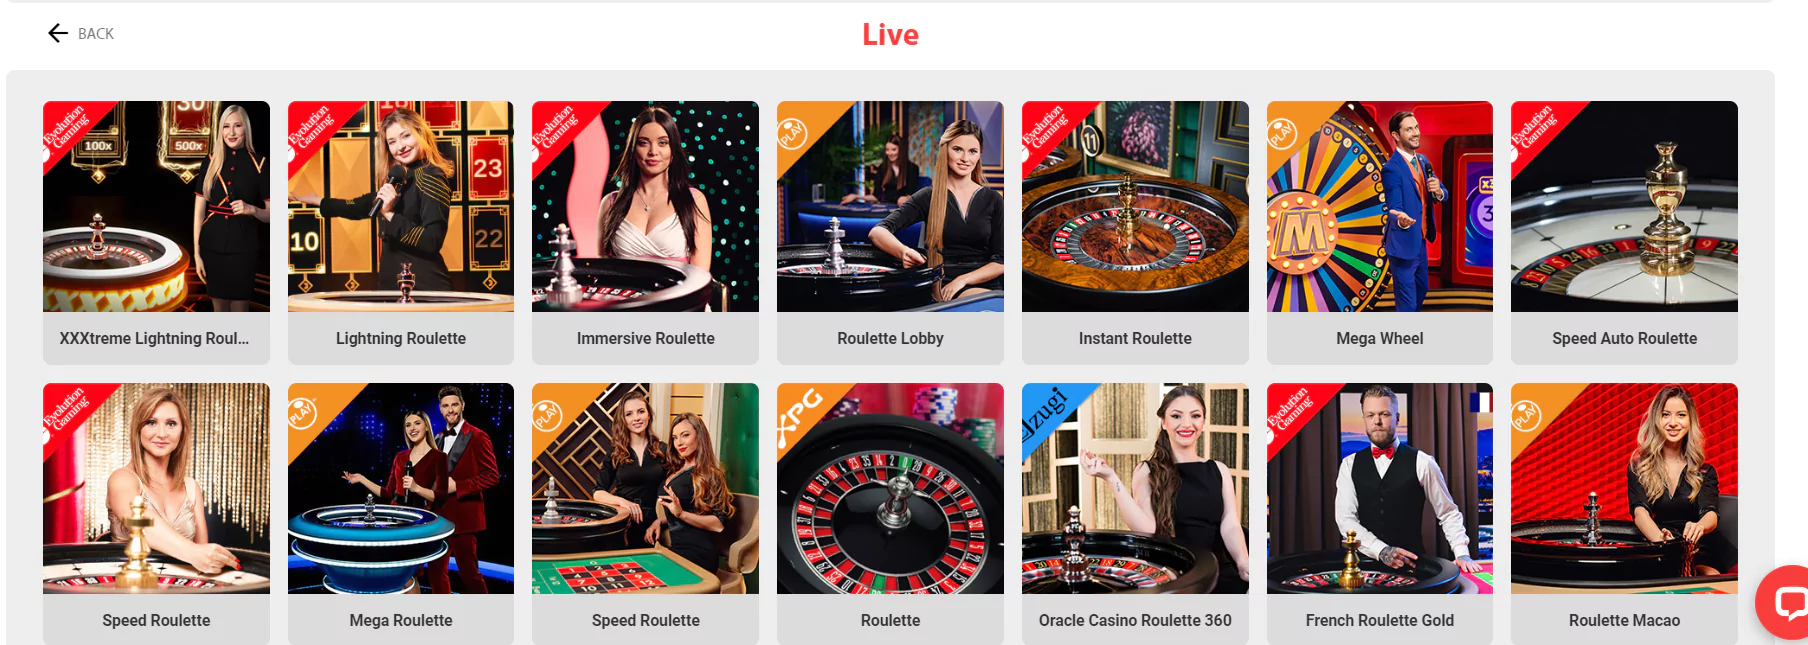 Screenshot of Live Roulette Online Casino Games